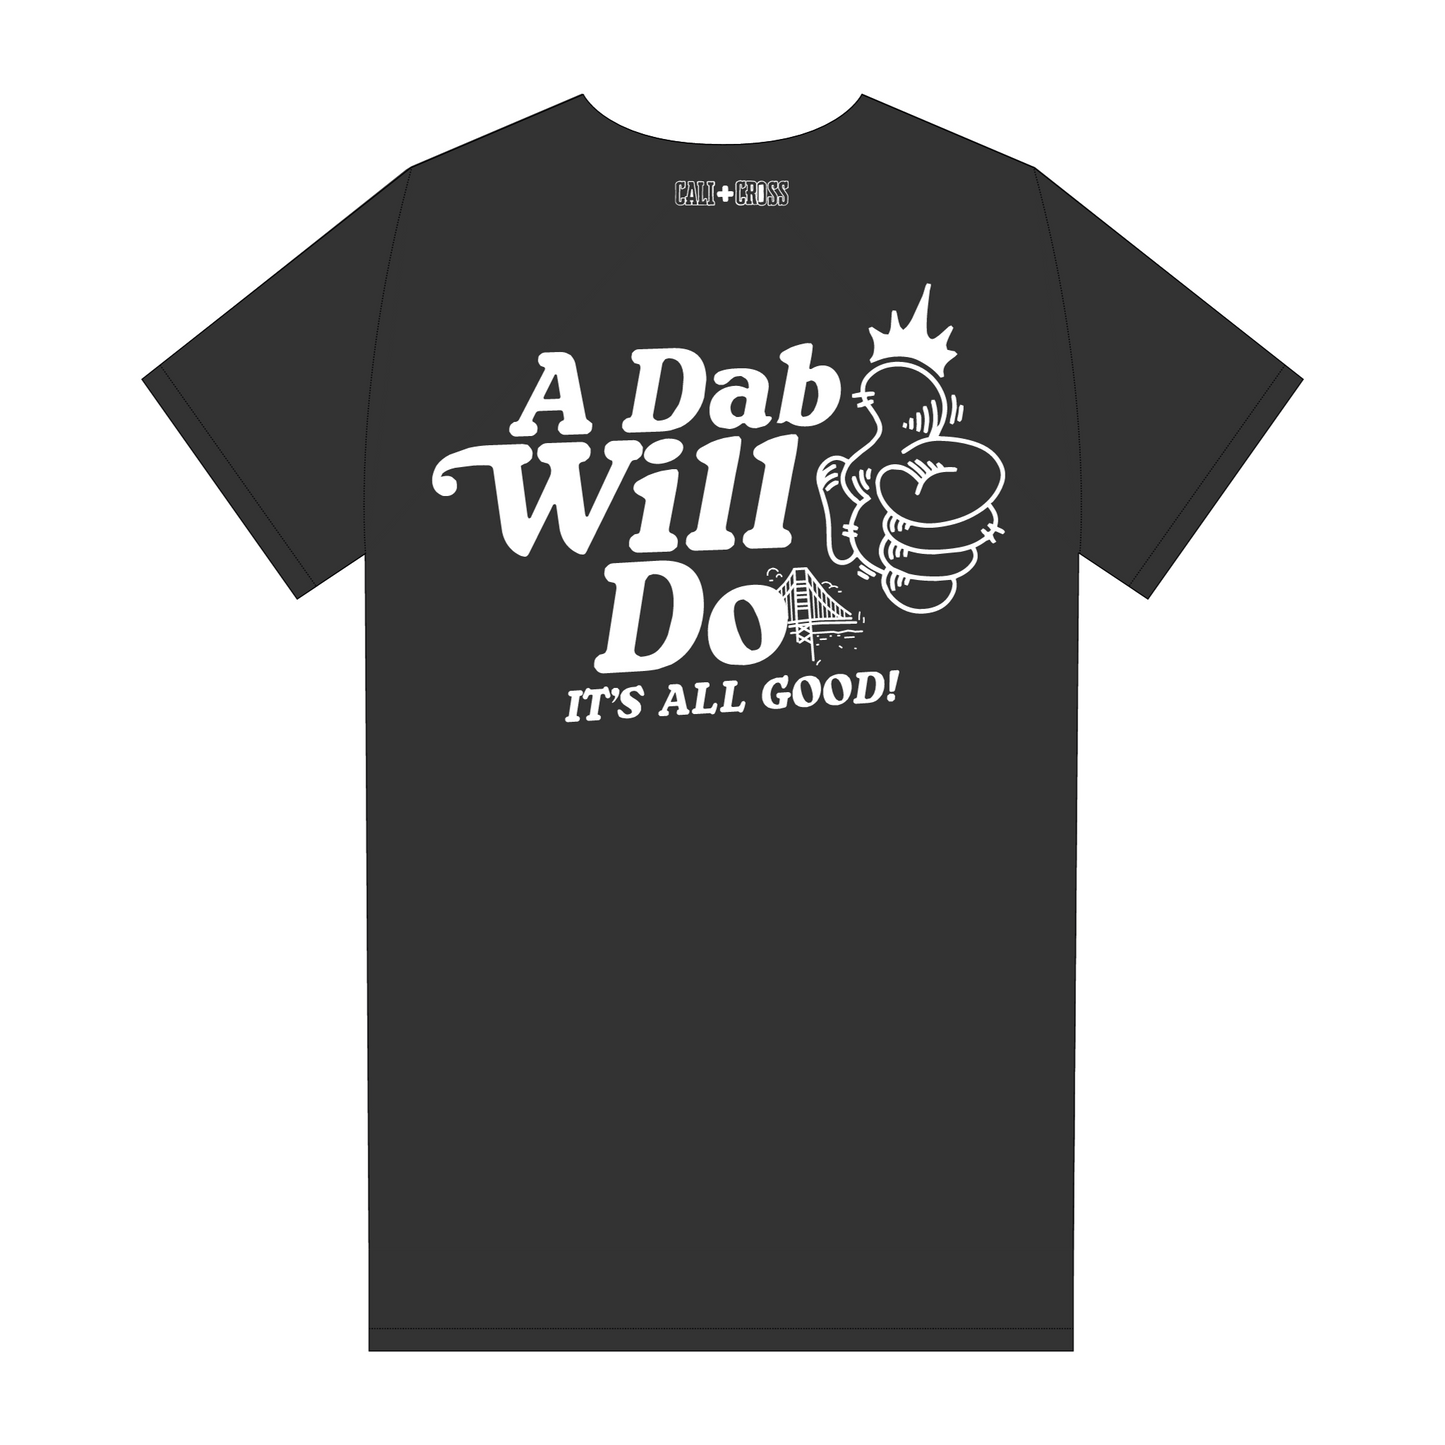 A Dab Will Do Tee